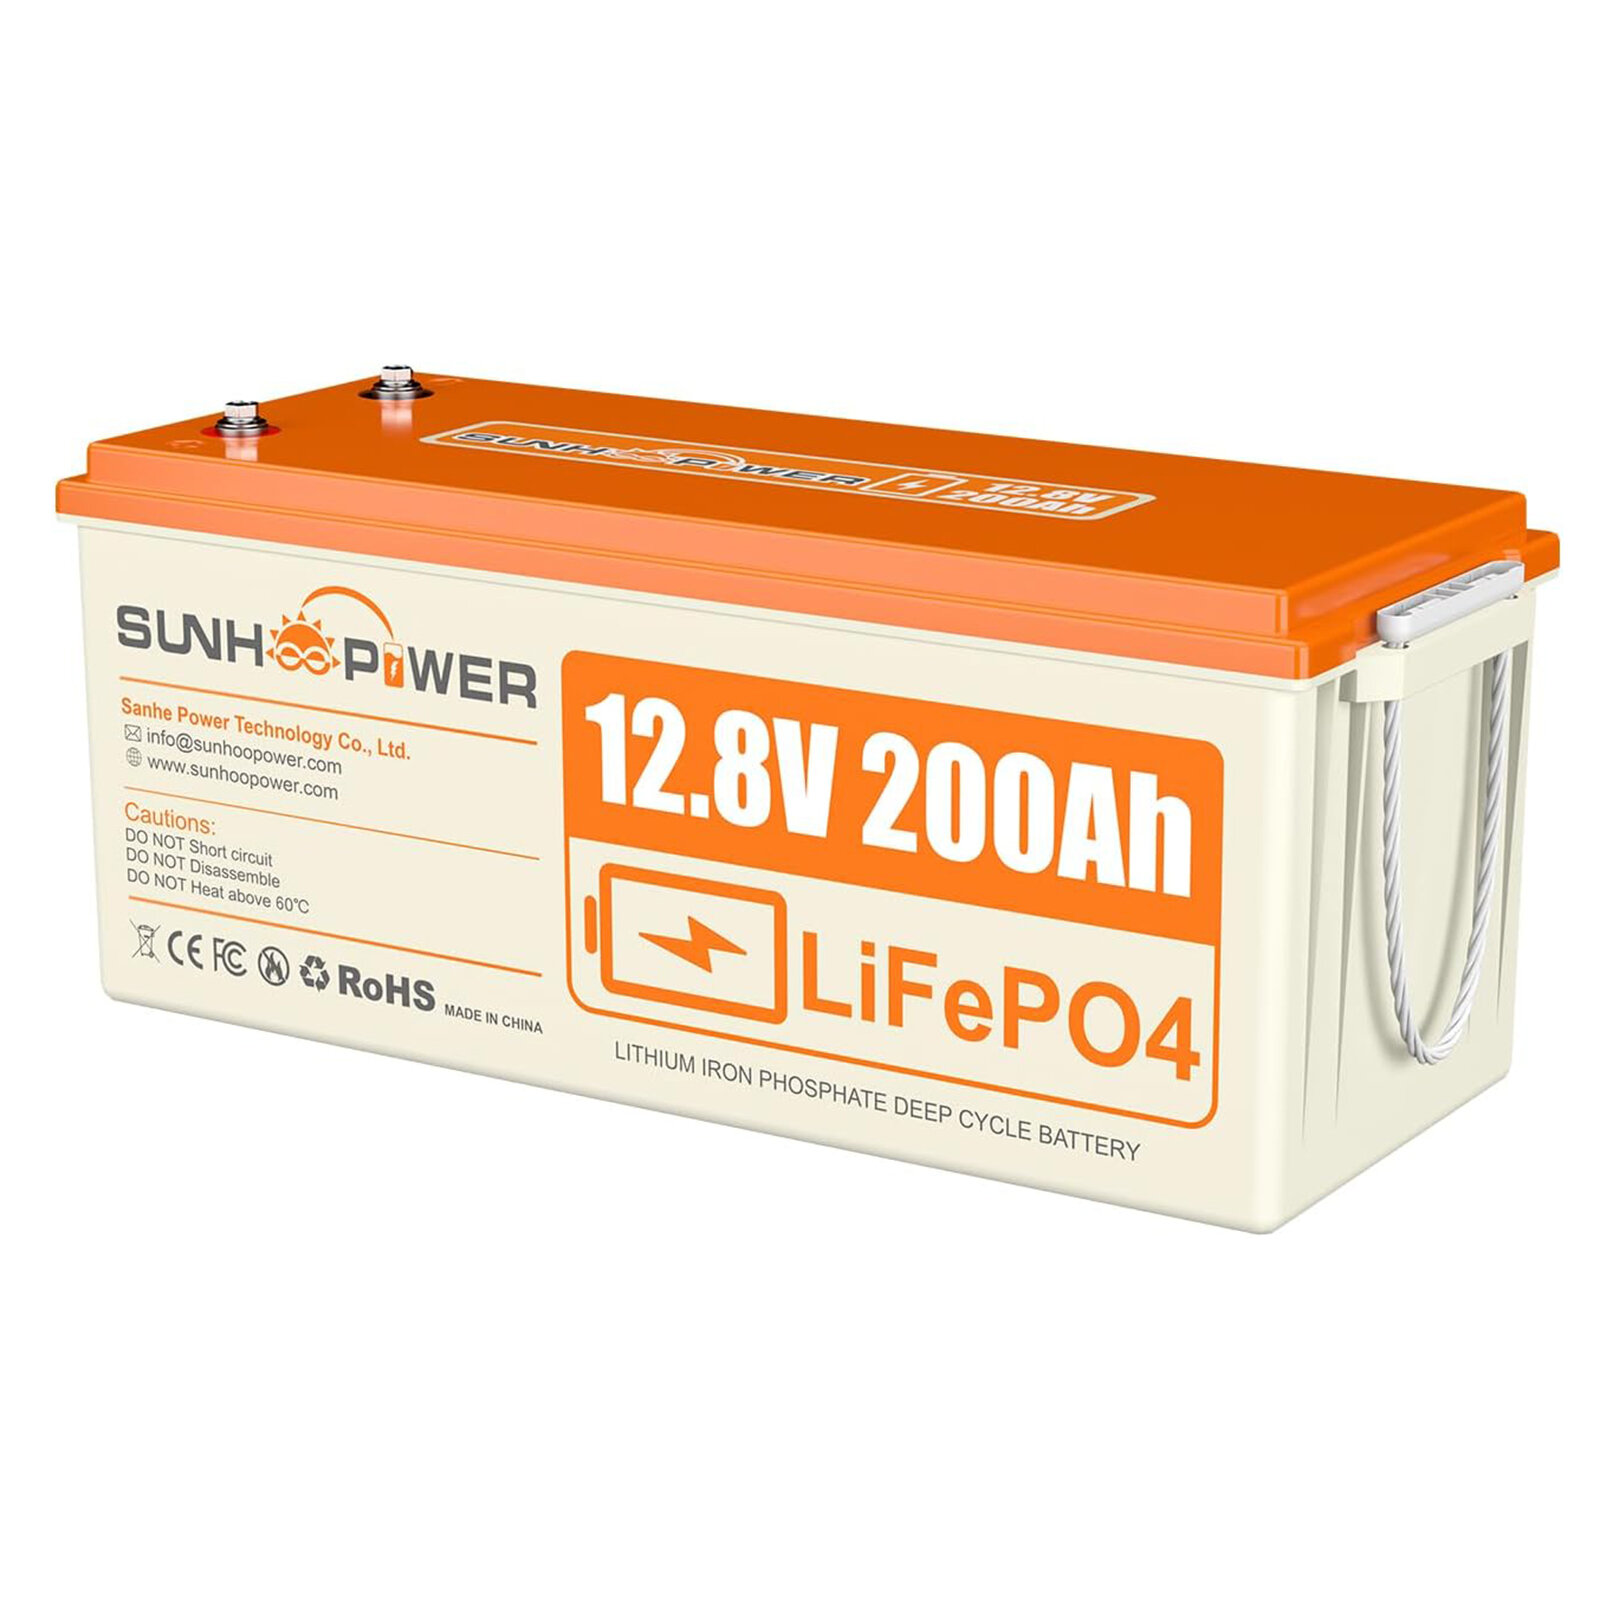 

[EU Direct] SUNHOOPOWER 12V 200AH LiFePO4 Battery, 2560Wh Rechargeable Lithium Battery Built-in 100A BMS, Self-Discharge